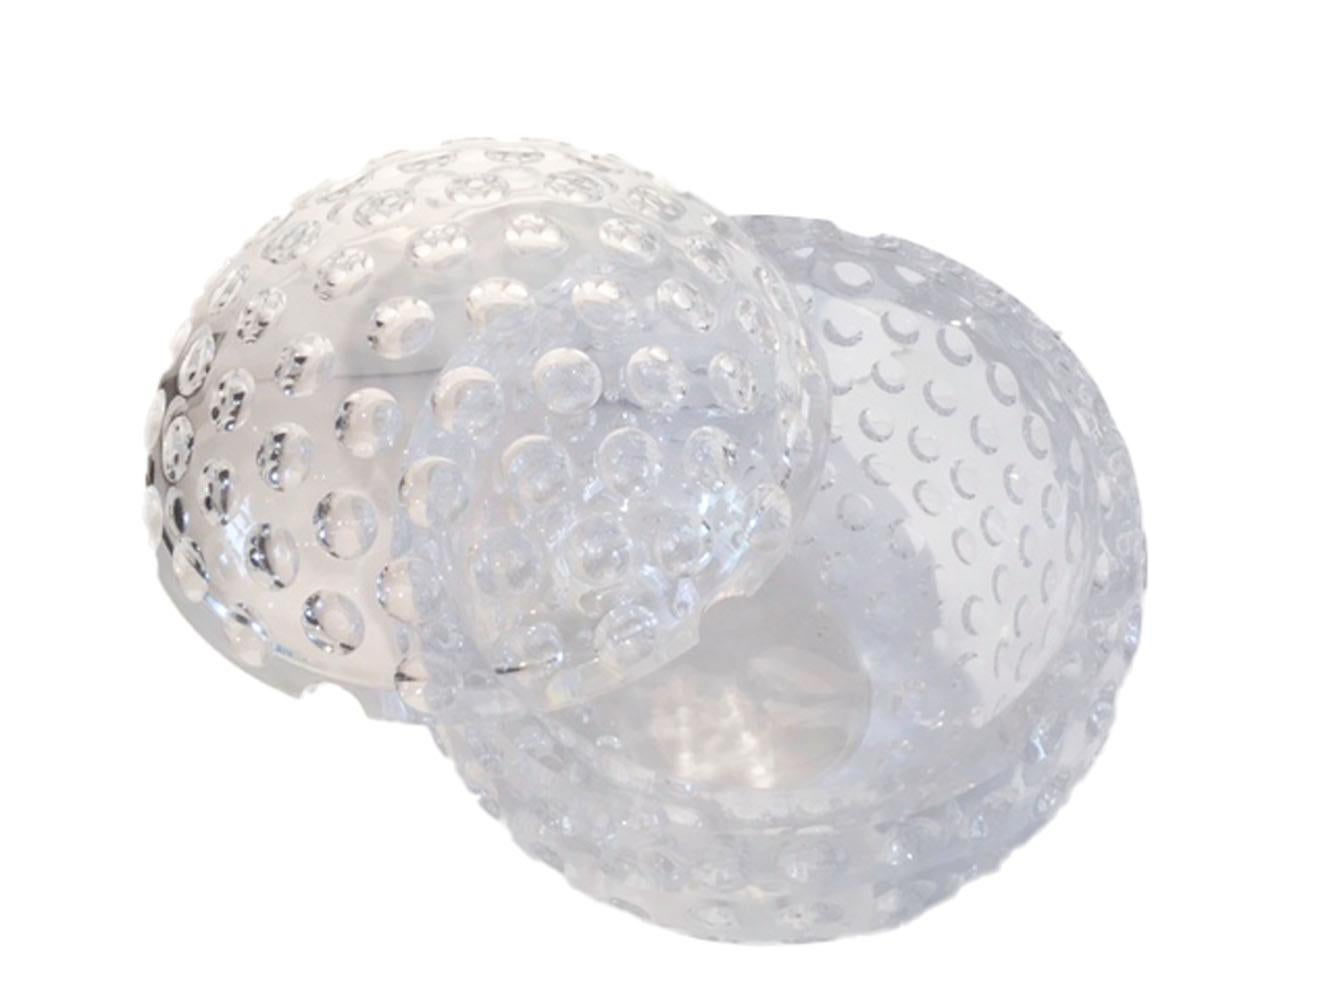 Vintage Lucite ice bucket of spherical form with a pivoting top. The entire surface covered with golf ball-like divots, each of which reflects the others creating an optical effect.